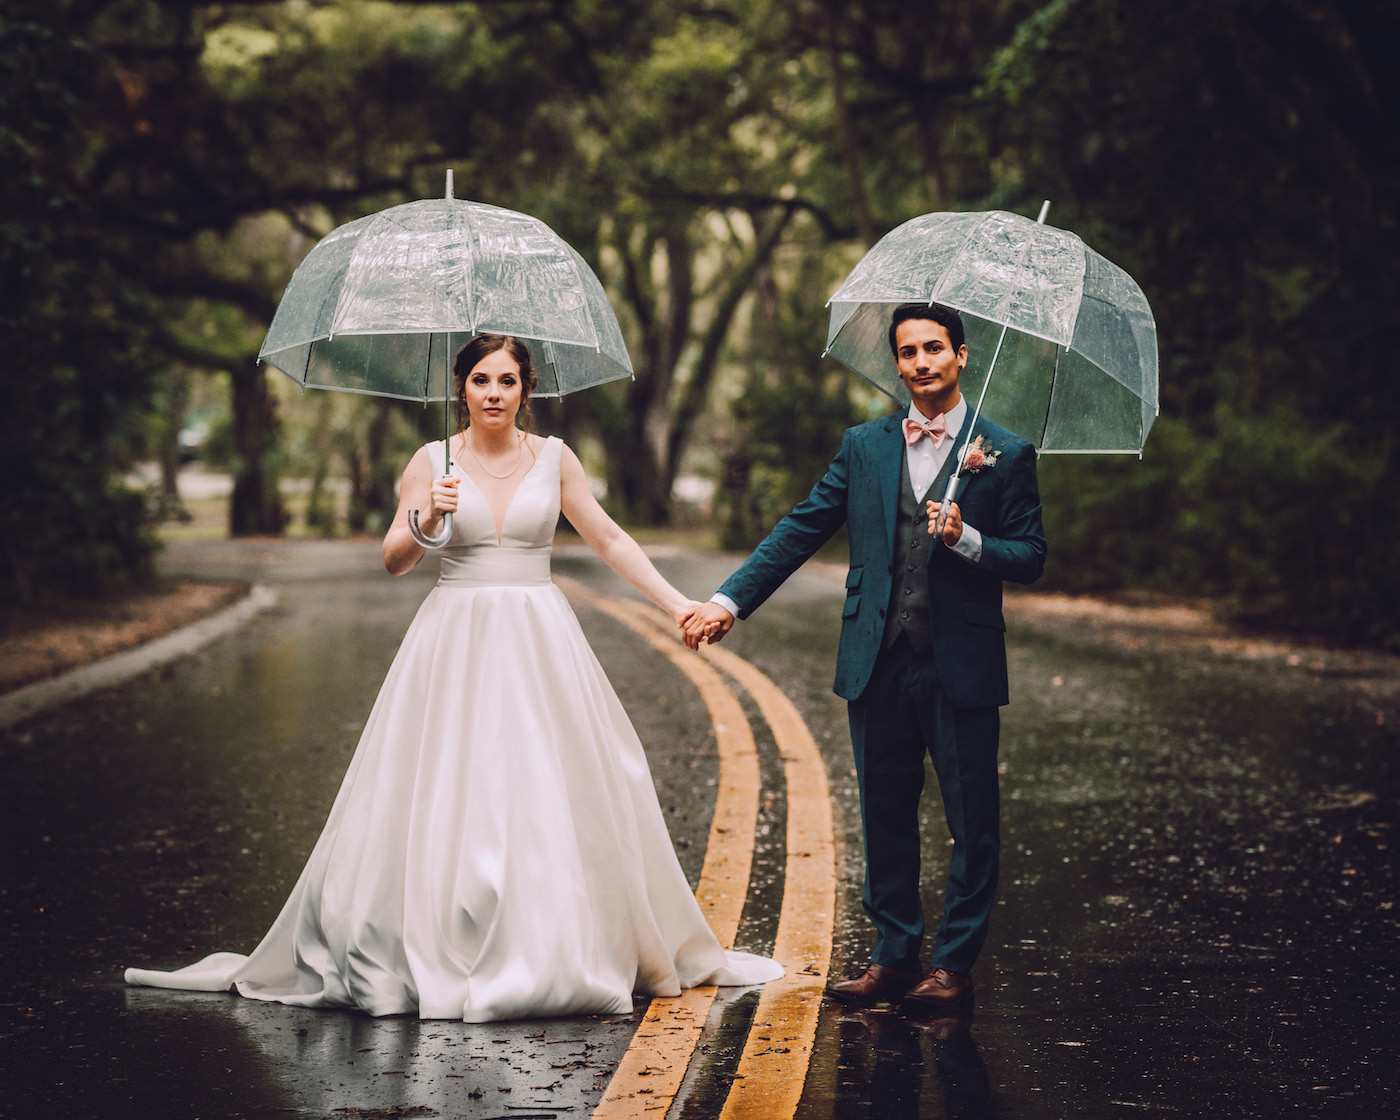 Bride and Groom Rainy Wedding Day Portrait with Clear Umbrellas | Stella York Satin V Neck Simple Classic Low Back Bridal Gown A Line Ballgown | Navy Blue Suit Groom Suit with Grey Vest and Blush Pink Bow Tie